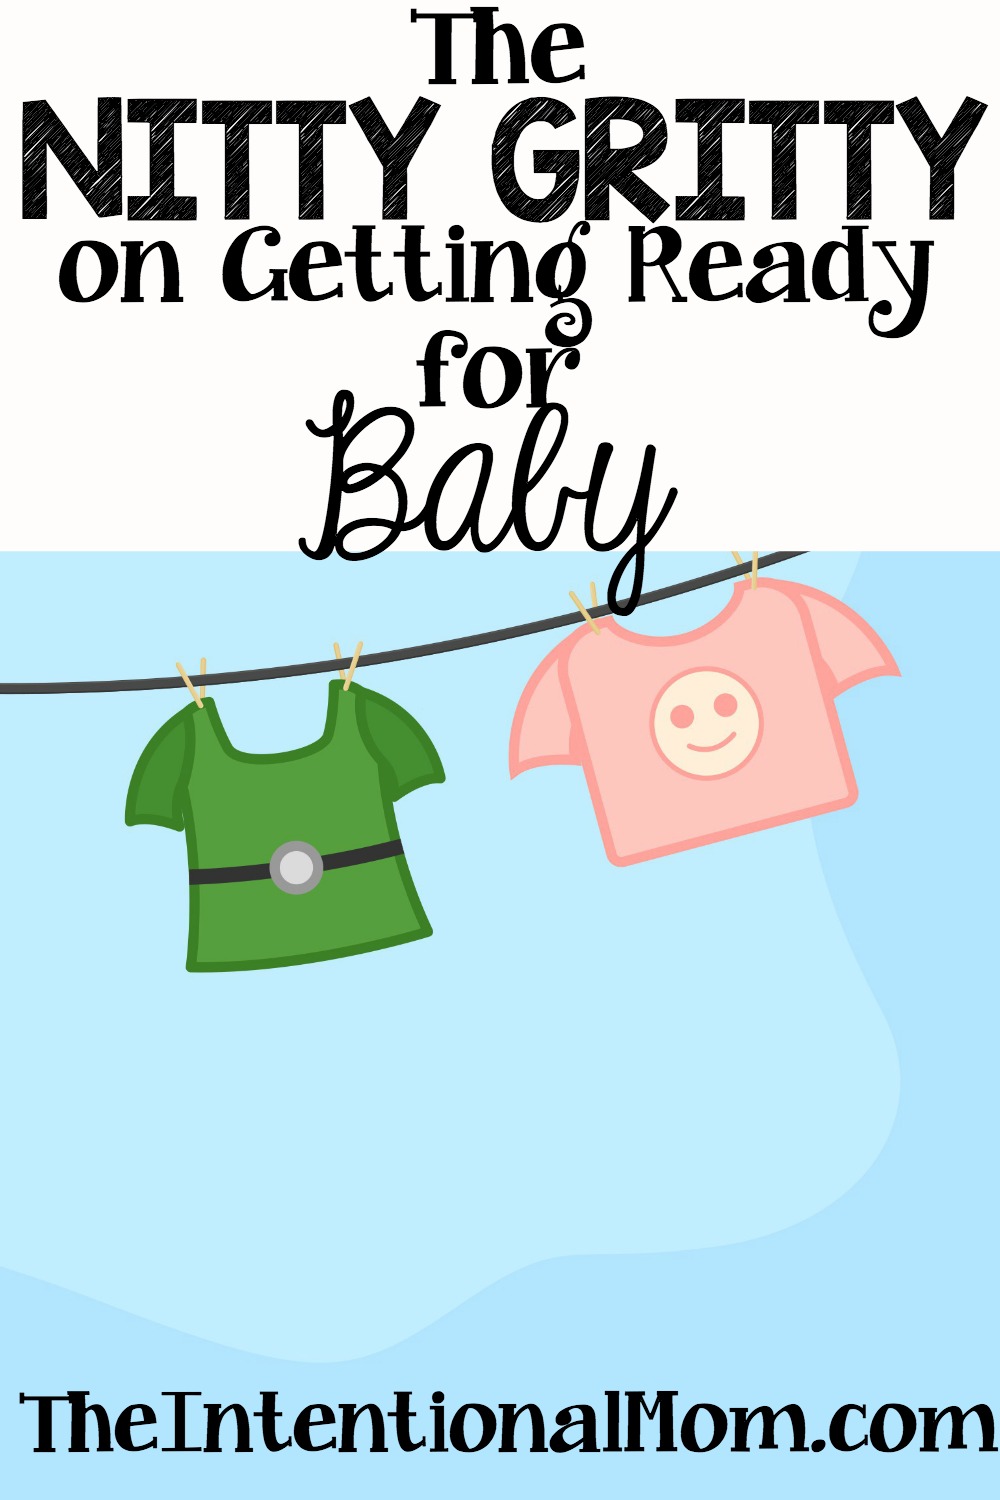 The Nitty Gritty on Getting Ready For Baby